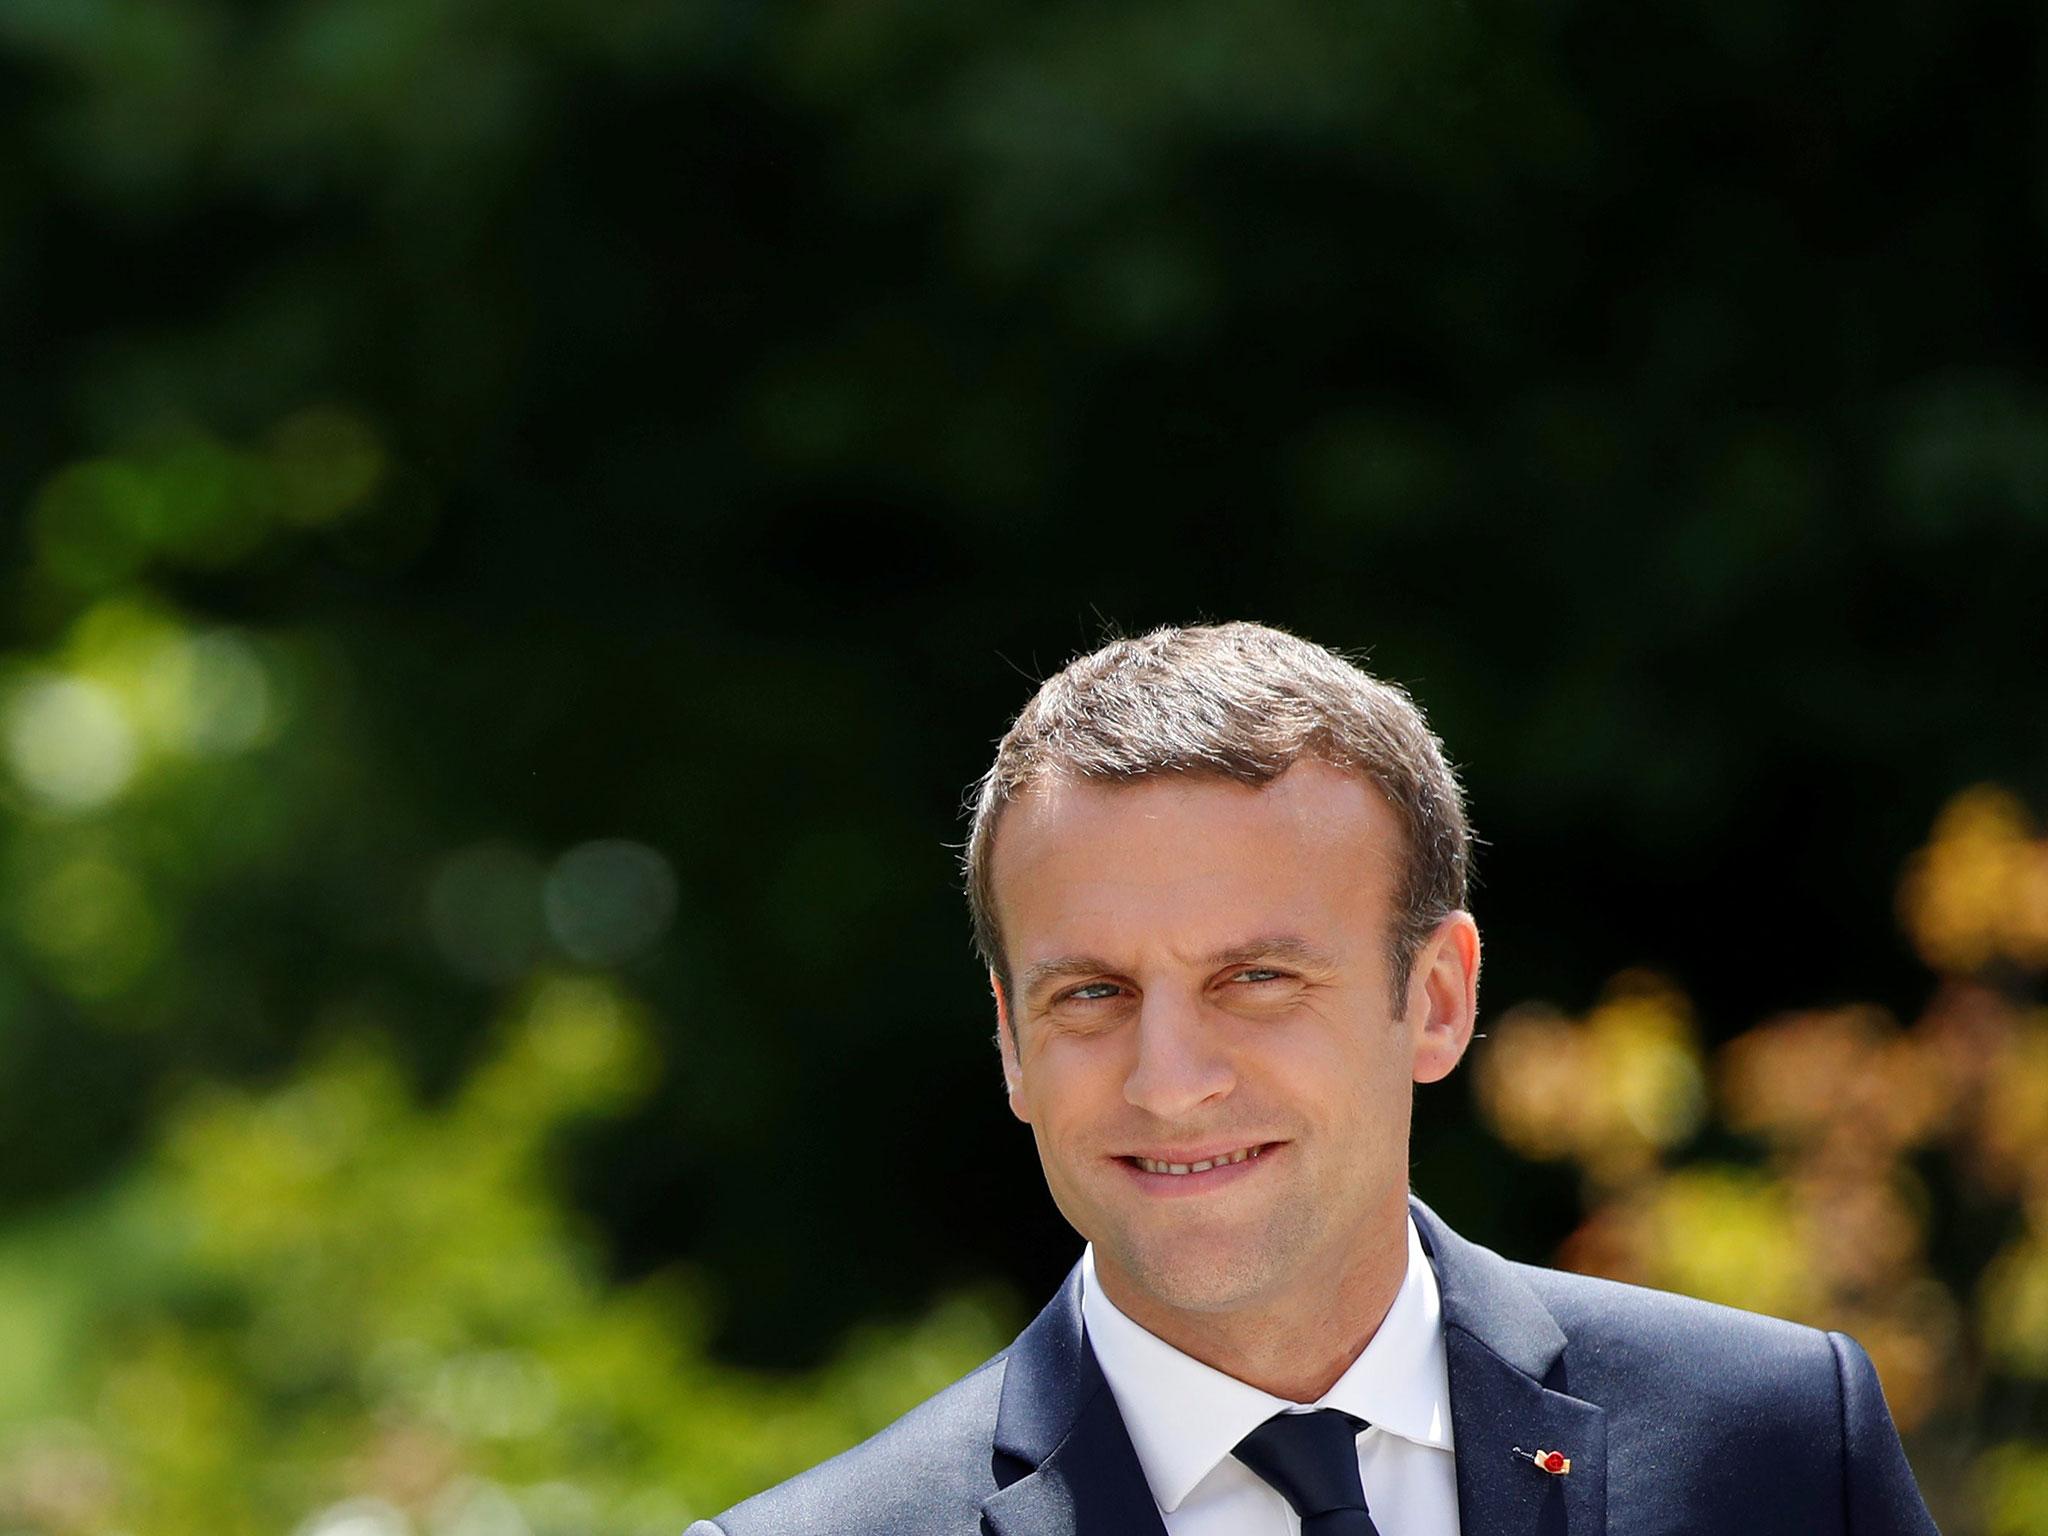 French President Emmanuel Macron during a news conference at the Elysee Palace on 16 June